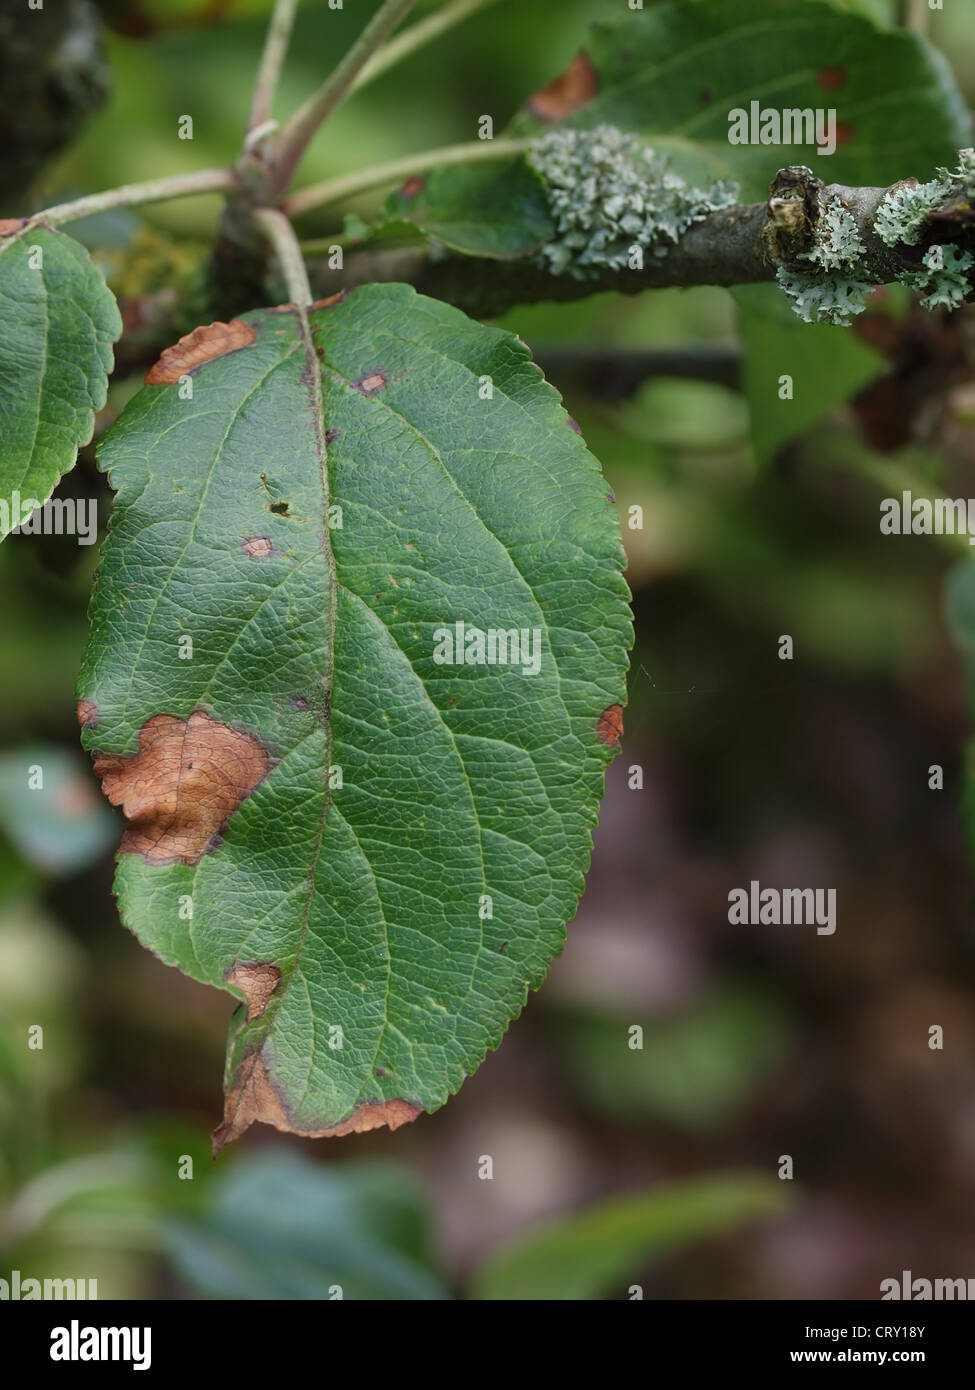 Lesions caused by alternaria fungus on diseased apple leaf Stock Photo